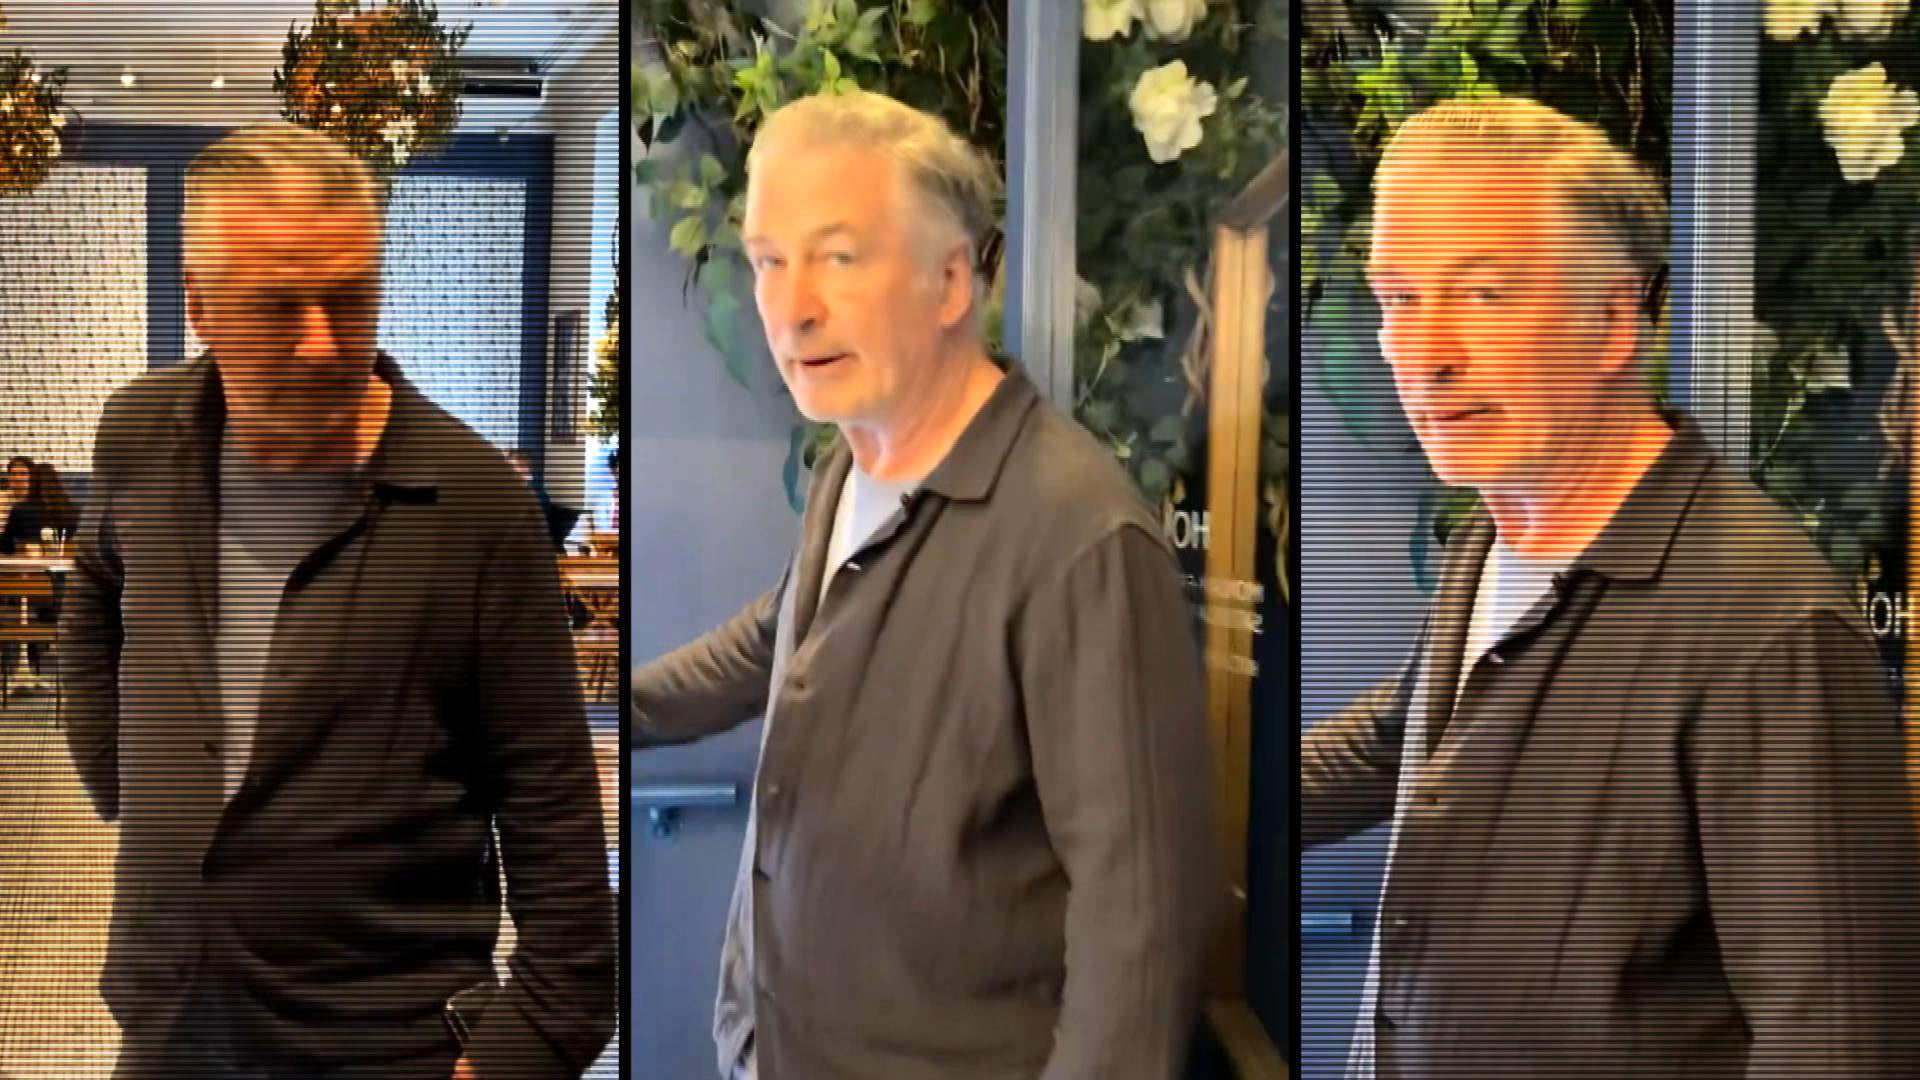 Alec Baldwin hits pro-Palestinian protester's phone after being heckled in cafe